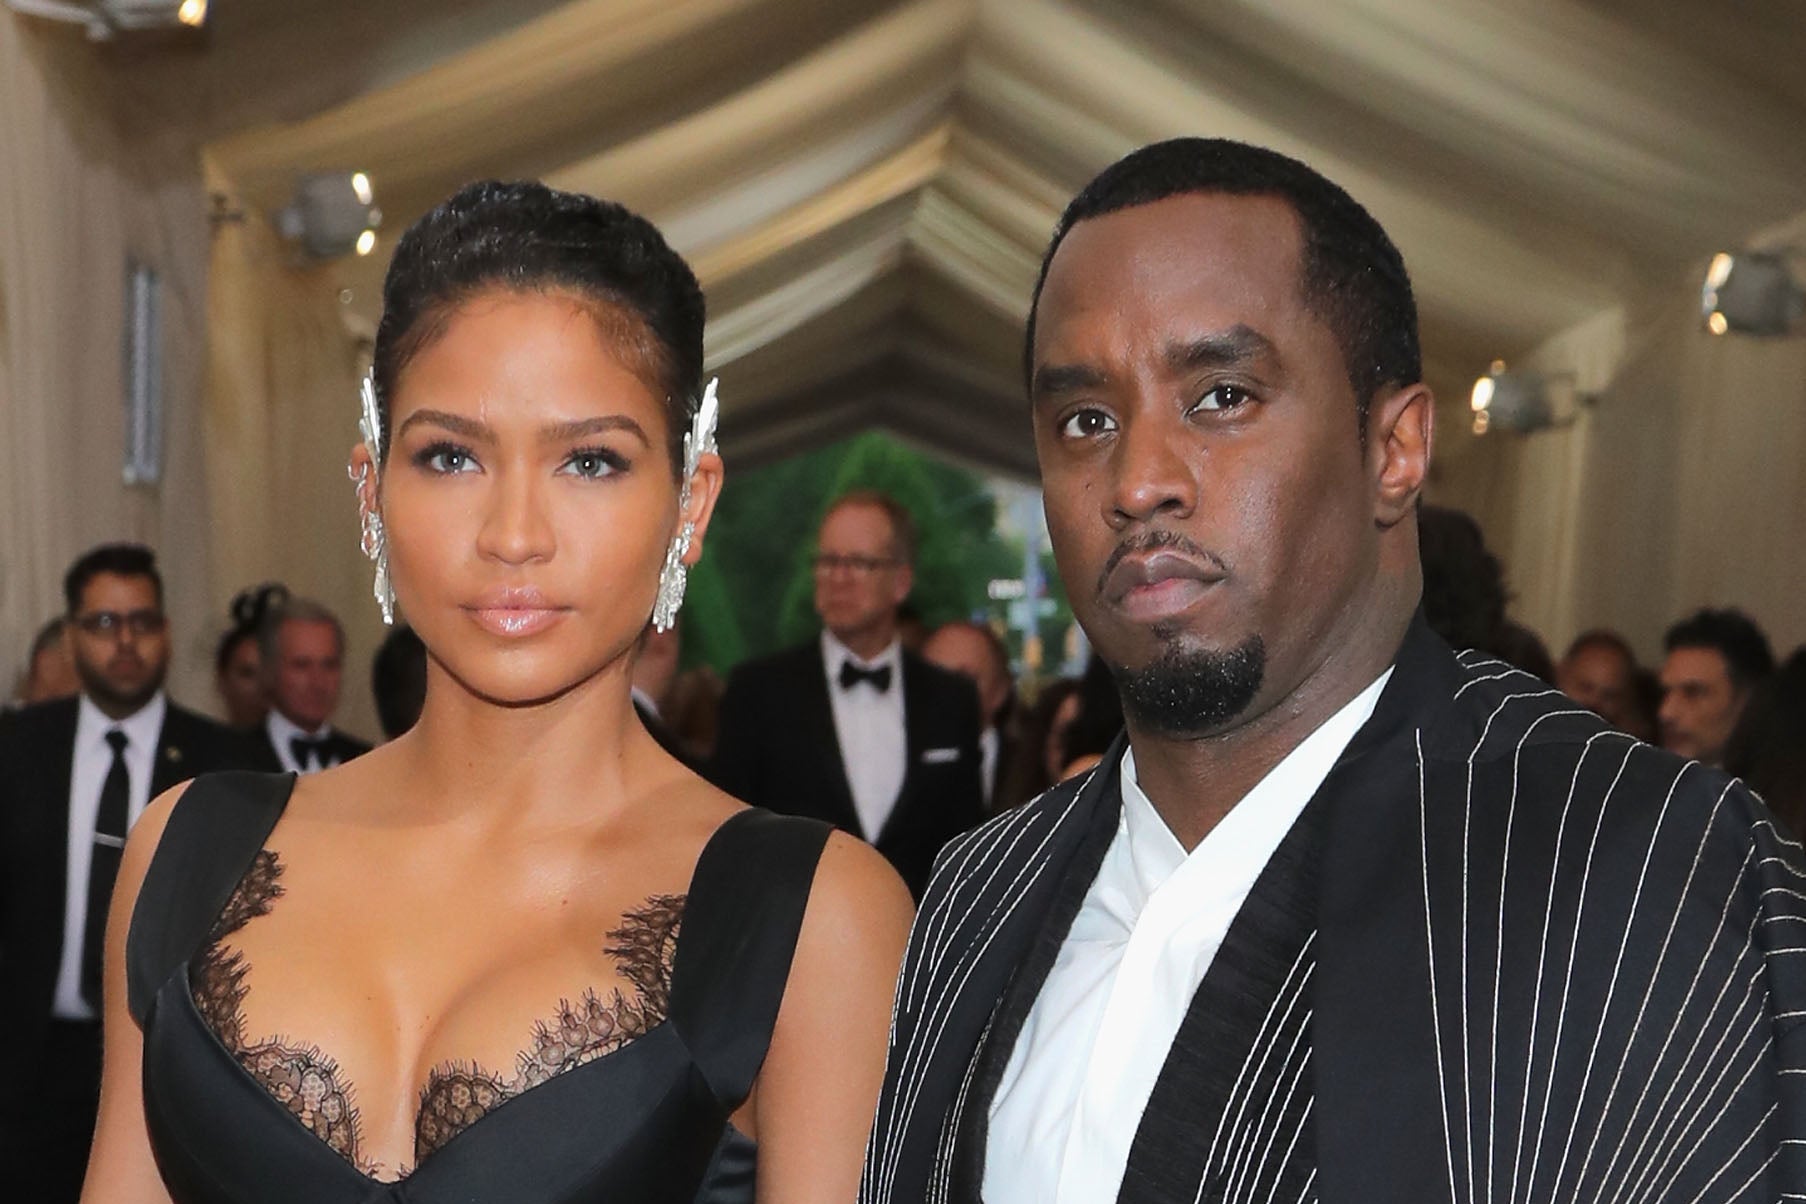 Cassie (left) and Sean “Diddy” Combs at the 2017 Met Gala. Cassie filed a lawsuit in 2023 alleging that she was trafficked, raped and beaten by Combs on many occasions over the course of 10 years